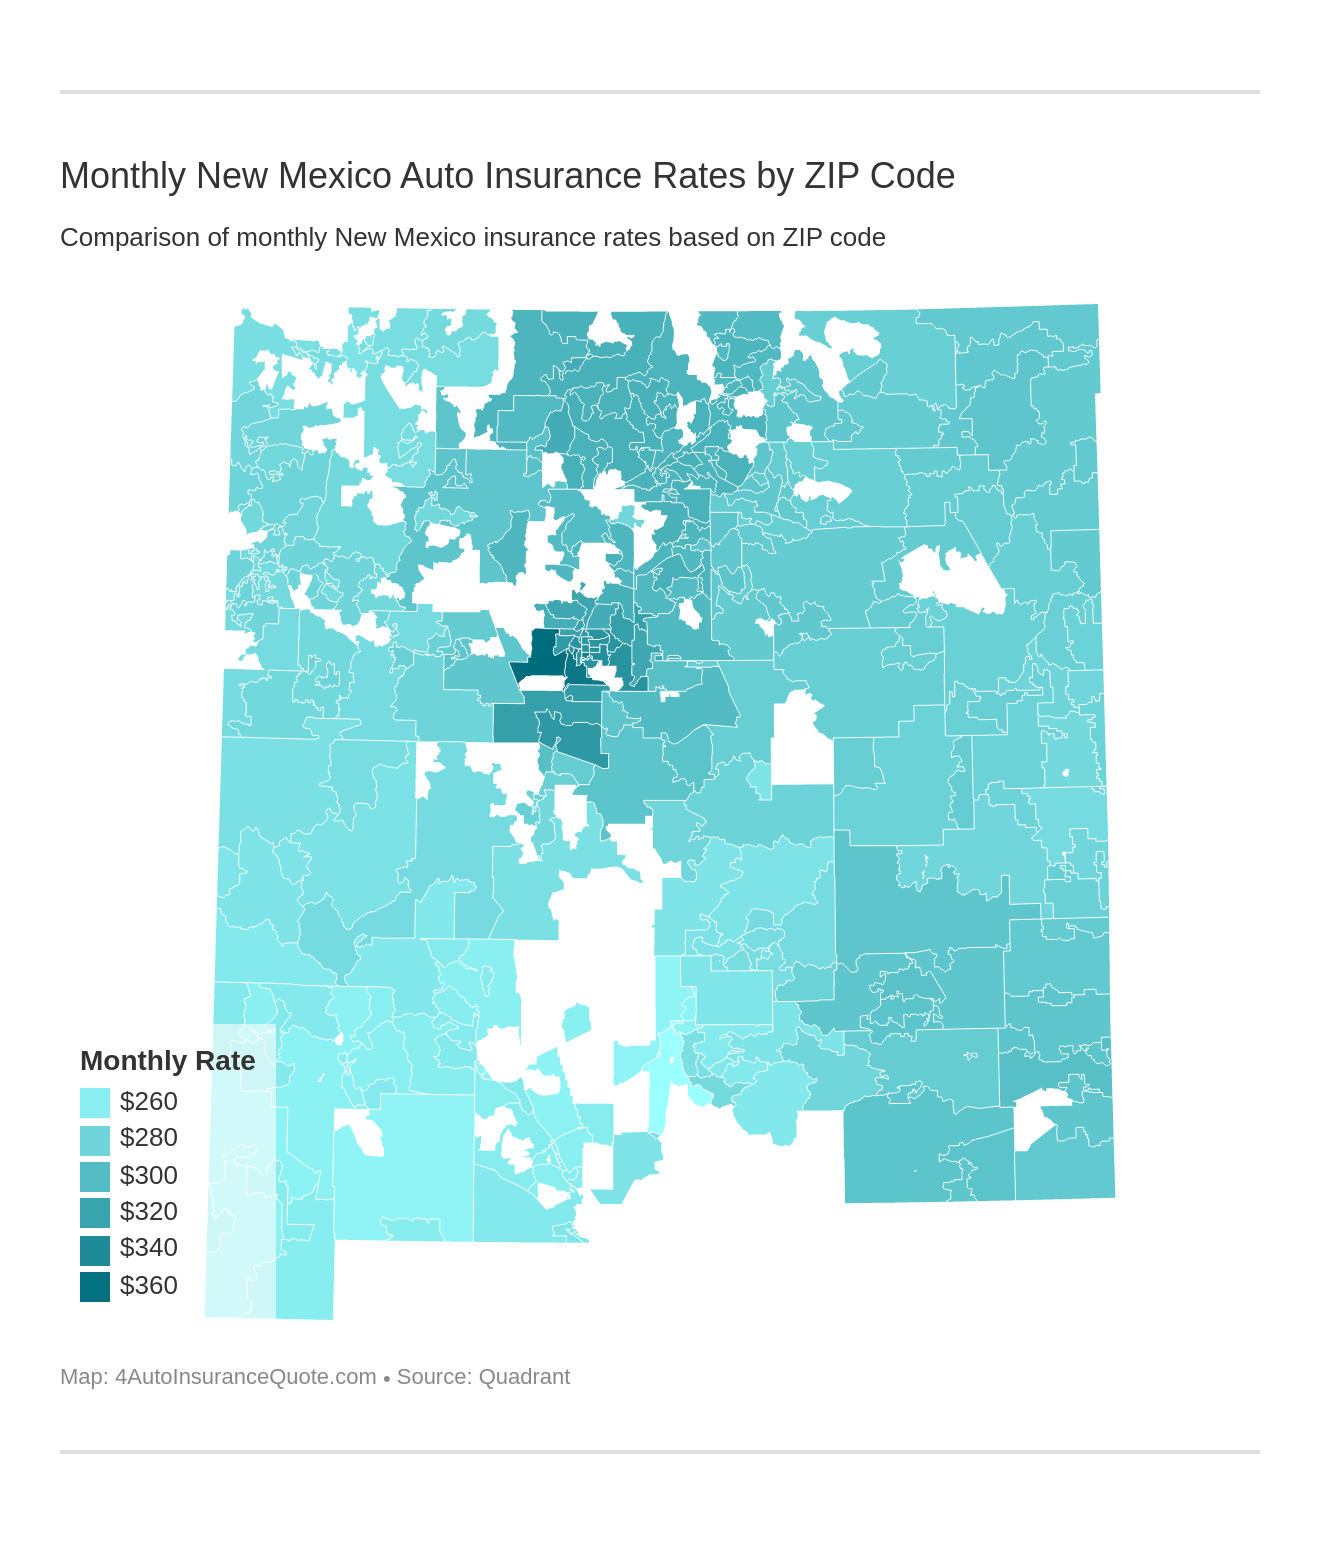 Monthly New Mexico Auto Insurance Rates by ZIP Code